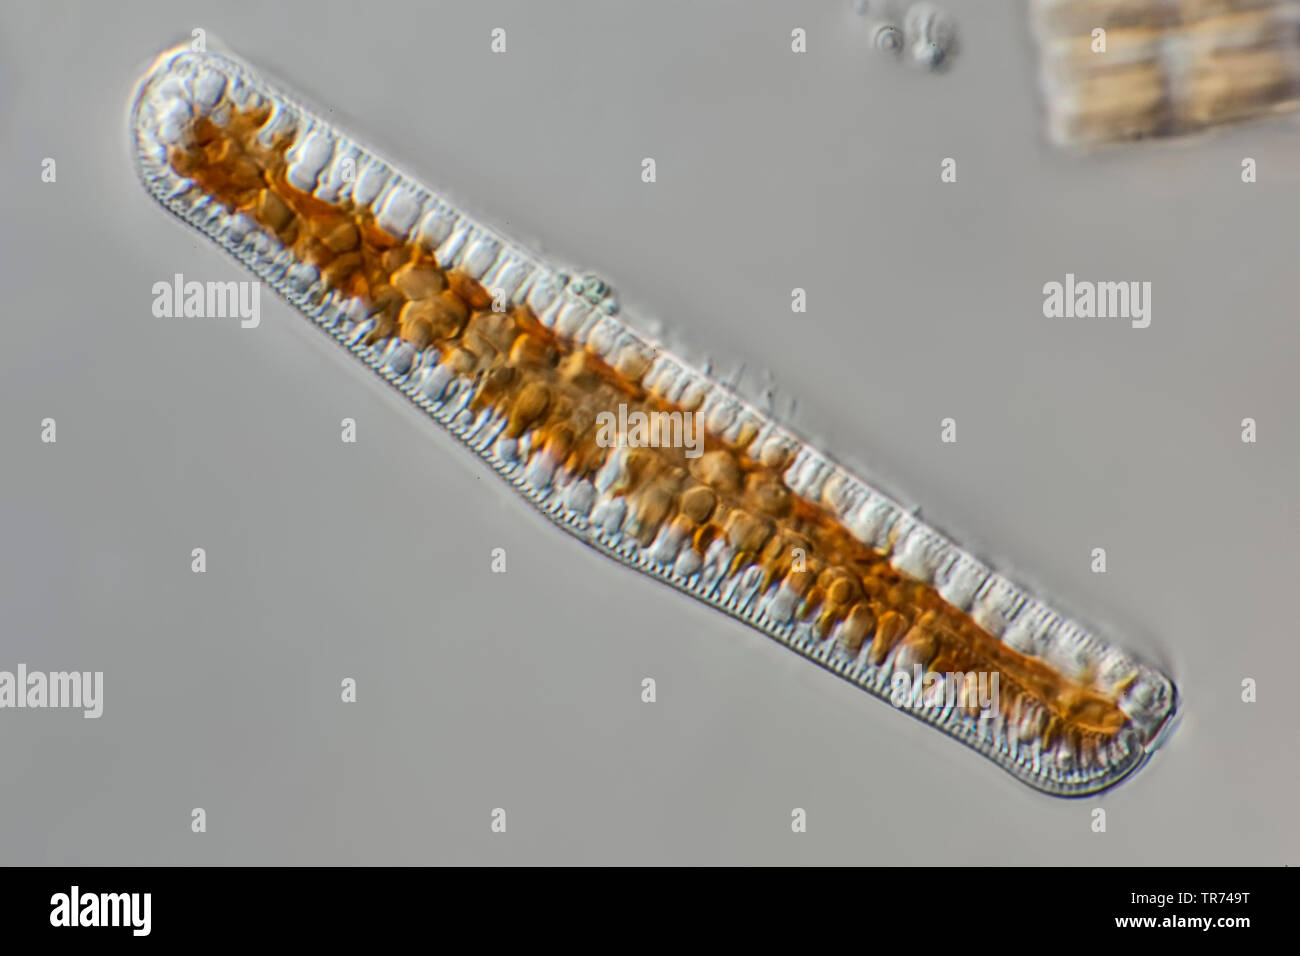 diatom (Diatomeae), living diatoms from West Iceland, in differential interference contrast, x 120, Iceland Stock Photo